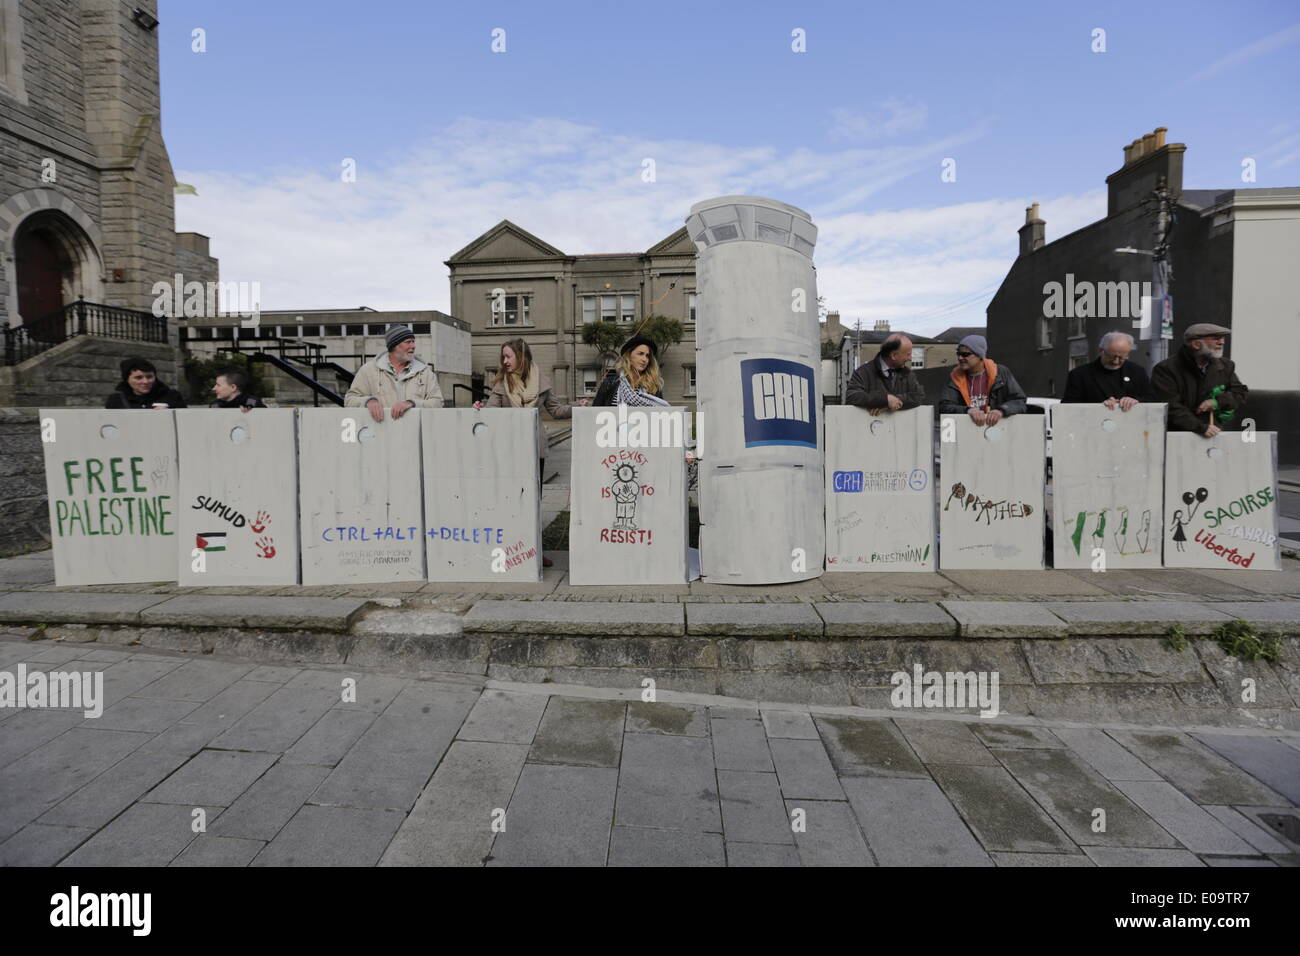 Activists from the Ireland Palestine Solidarity Campaign (IPSC) have built a model of the wall that divides Palestine and Israel at the protest outside the Annual General Meeting of the Irish building materials group CRH plc. The CRH Divestment Campaign of the IPSC calls for CRH plc to sell its stake in the Israeli Mashav Initiative and Development Ltd which owns the company which produces the cement for the wall that divides the West Bank from Israel. Stock Photo